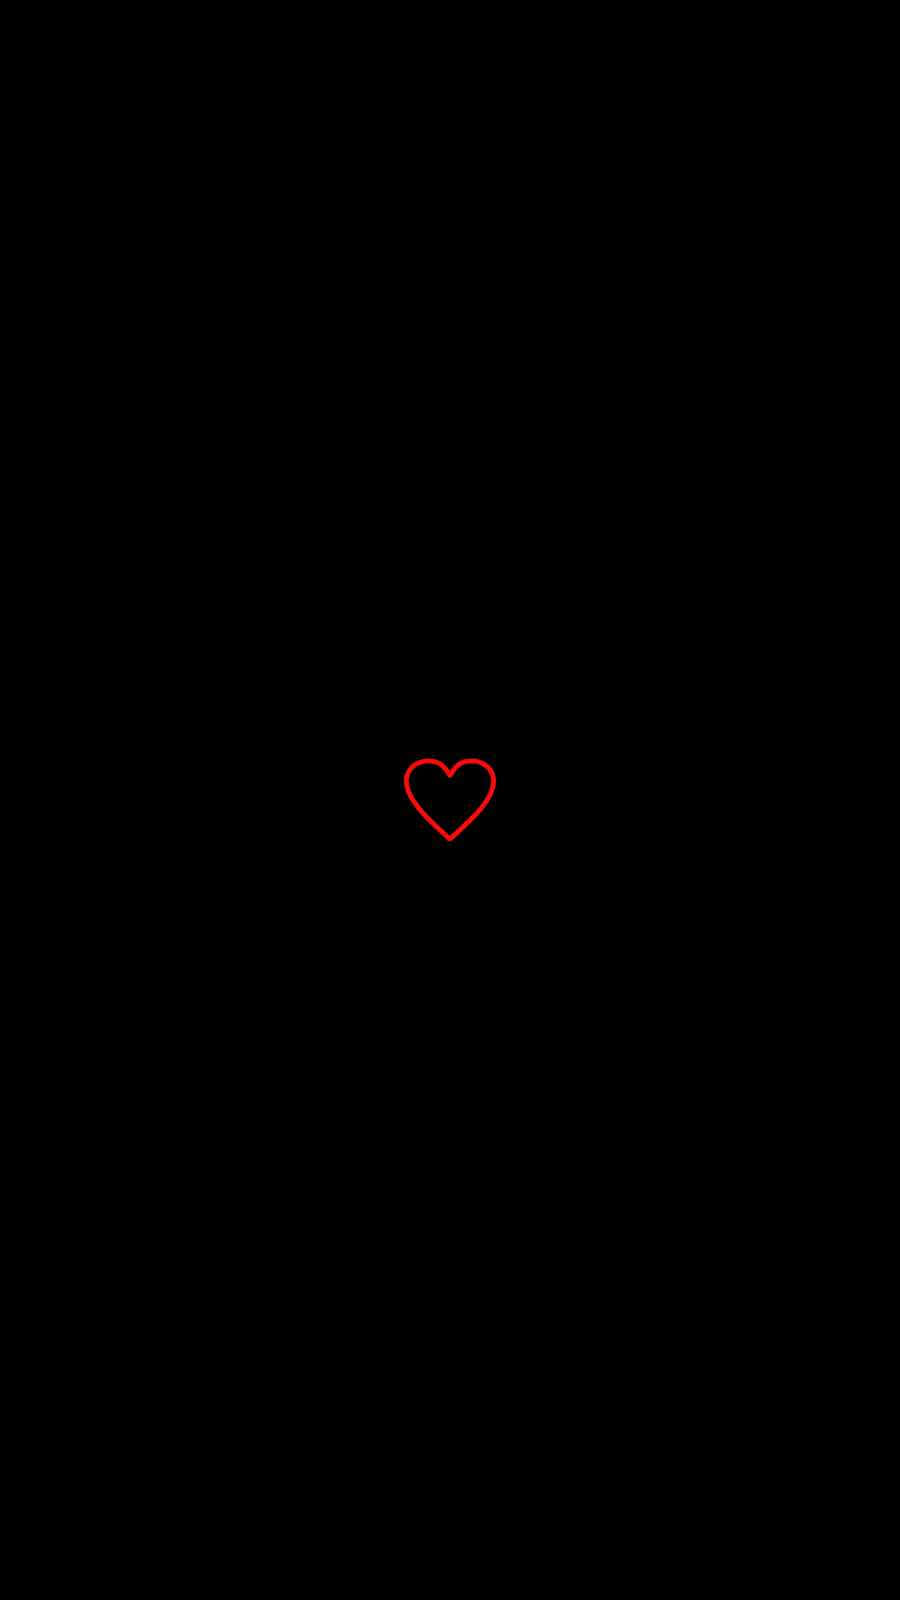 Red Outline Black Heart iPhone Wallpaper